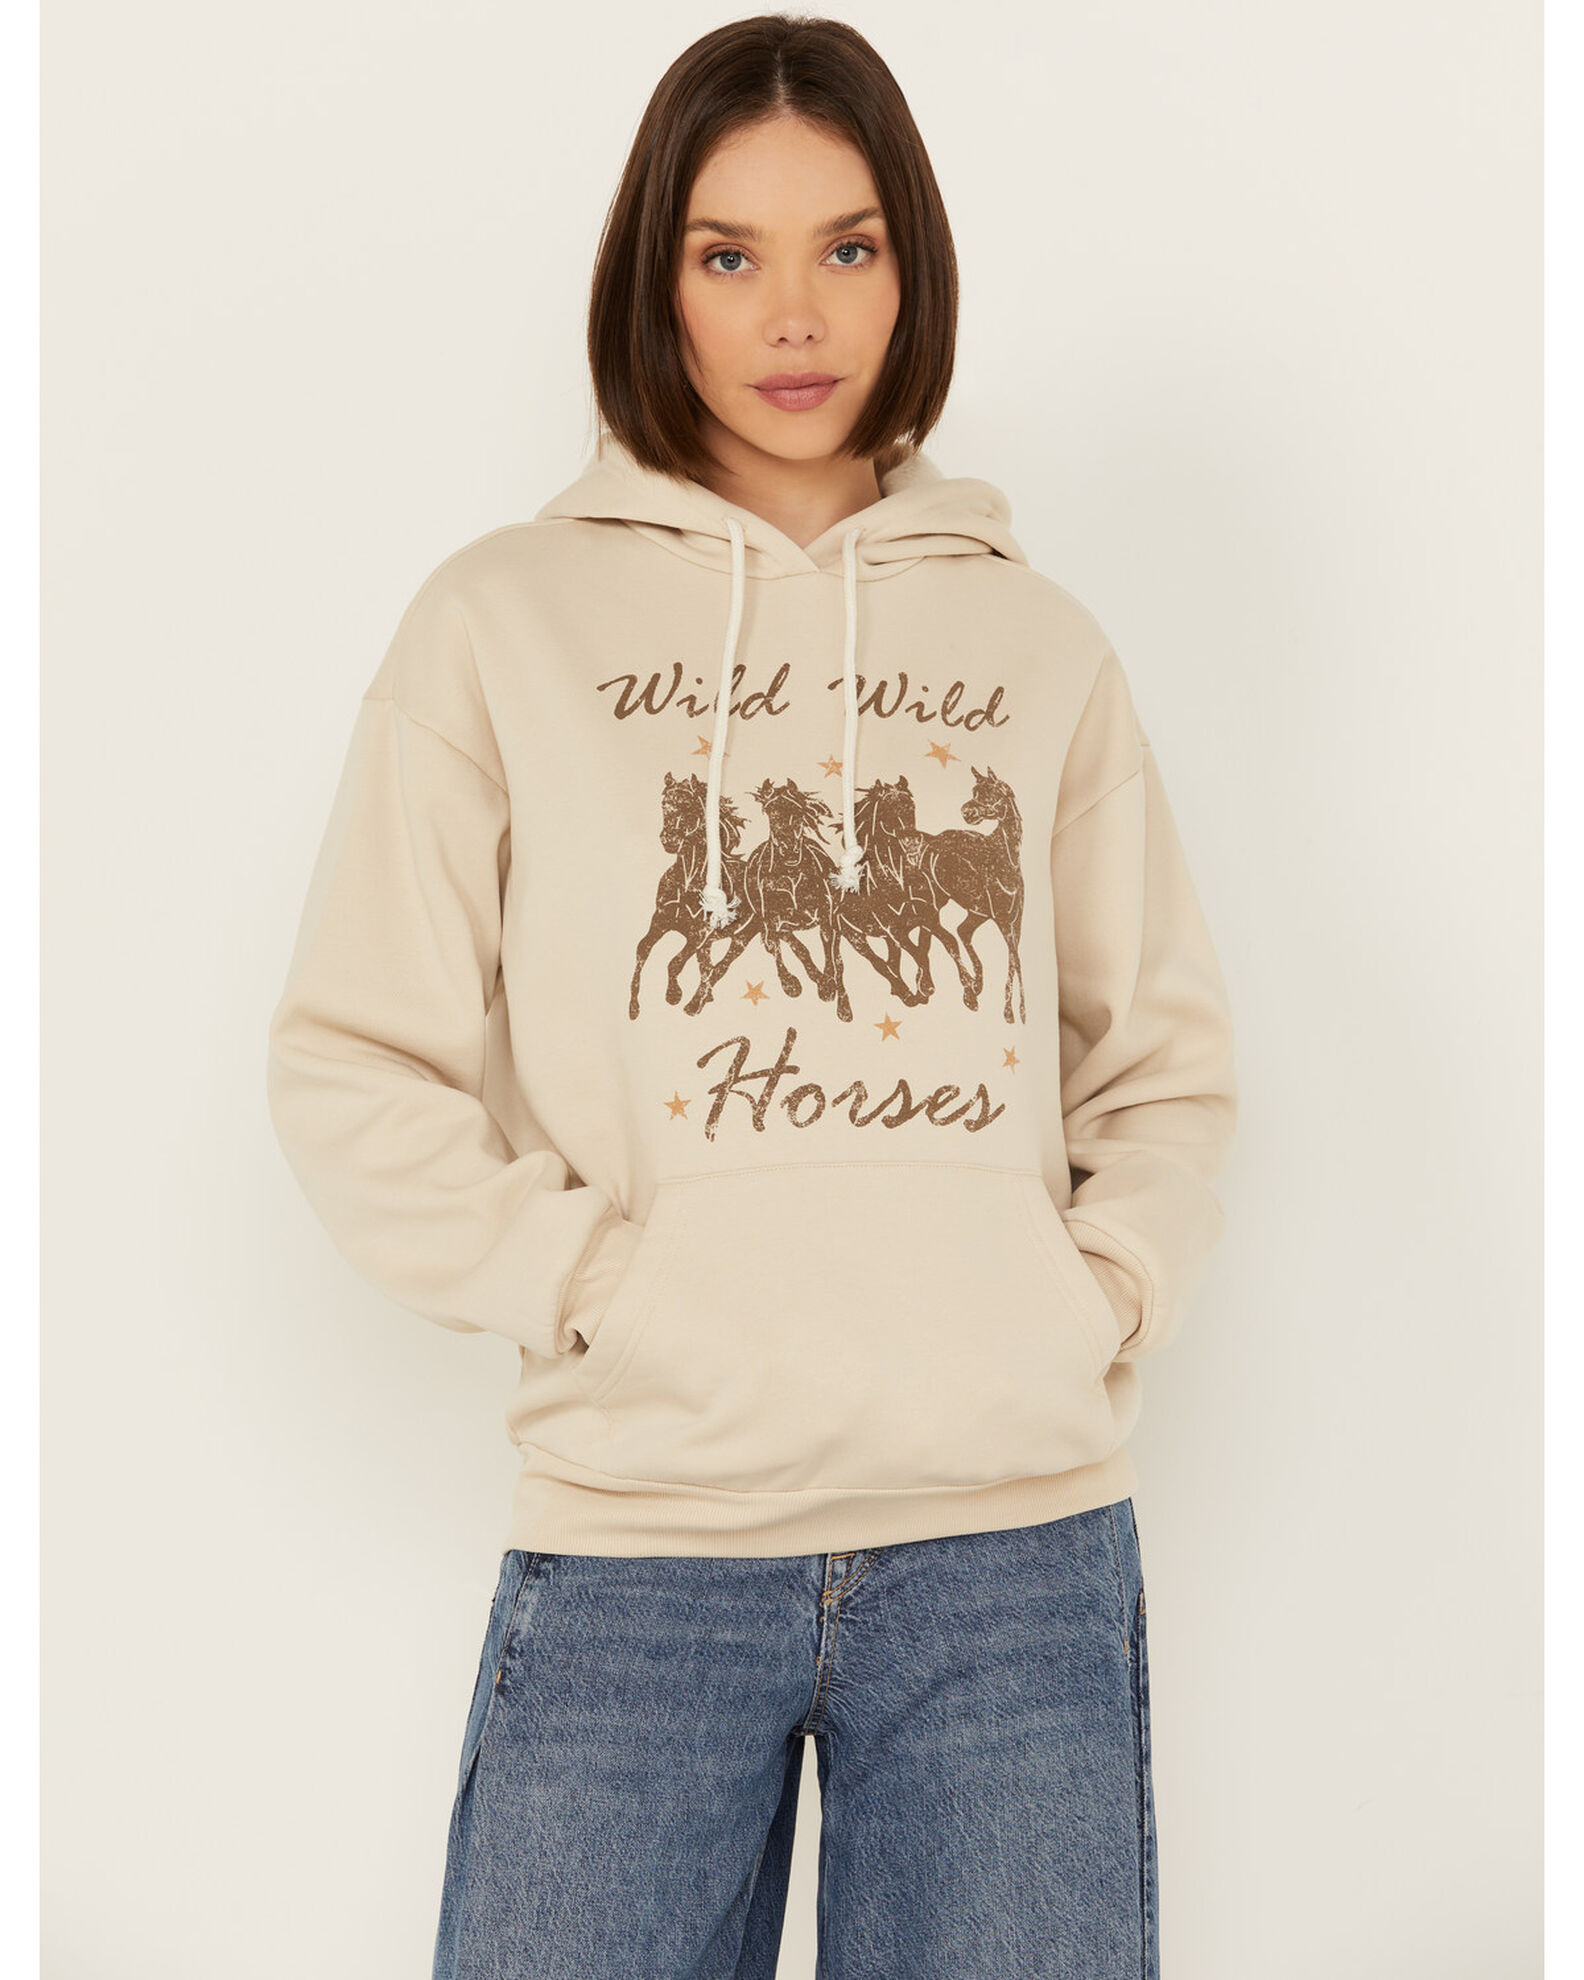 Youth Revolt Women's Hold Horses Graphic Hoodie